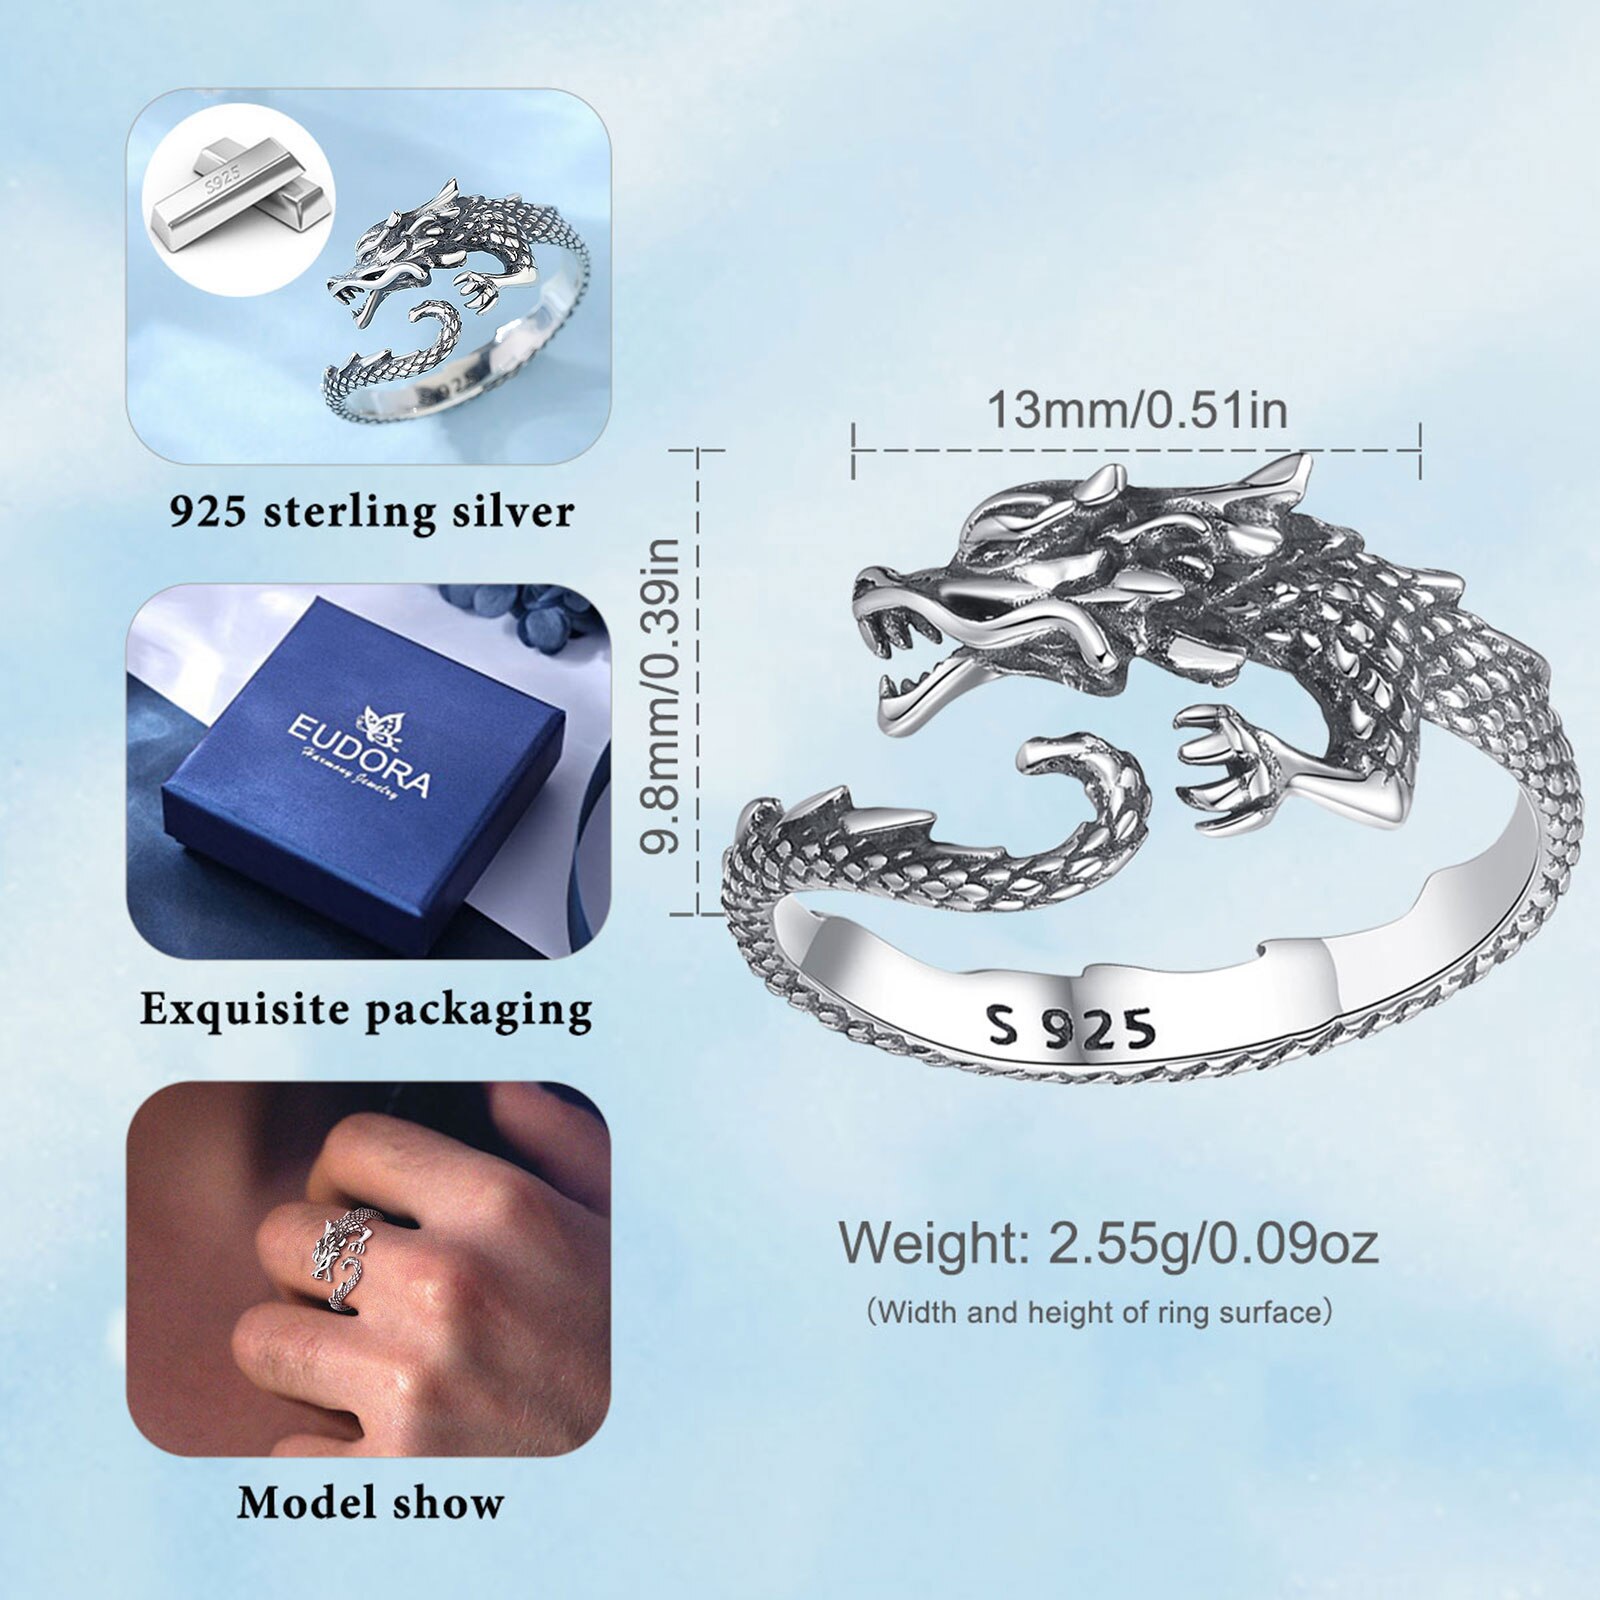 Eudora 925 Sterling Silver Cool Dragon Adjustable Ring for Men Women Temperament Personality Dragon Ring vintage Jewelry Gift 2